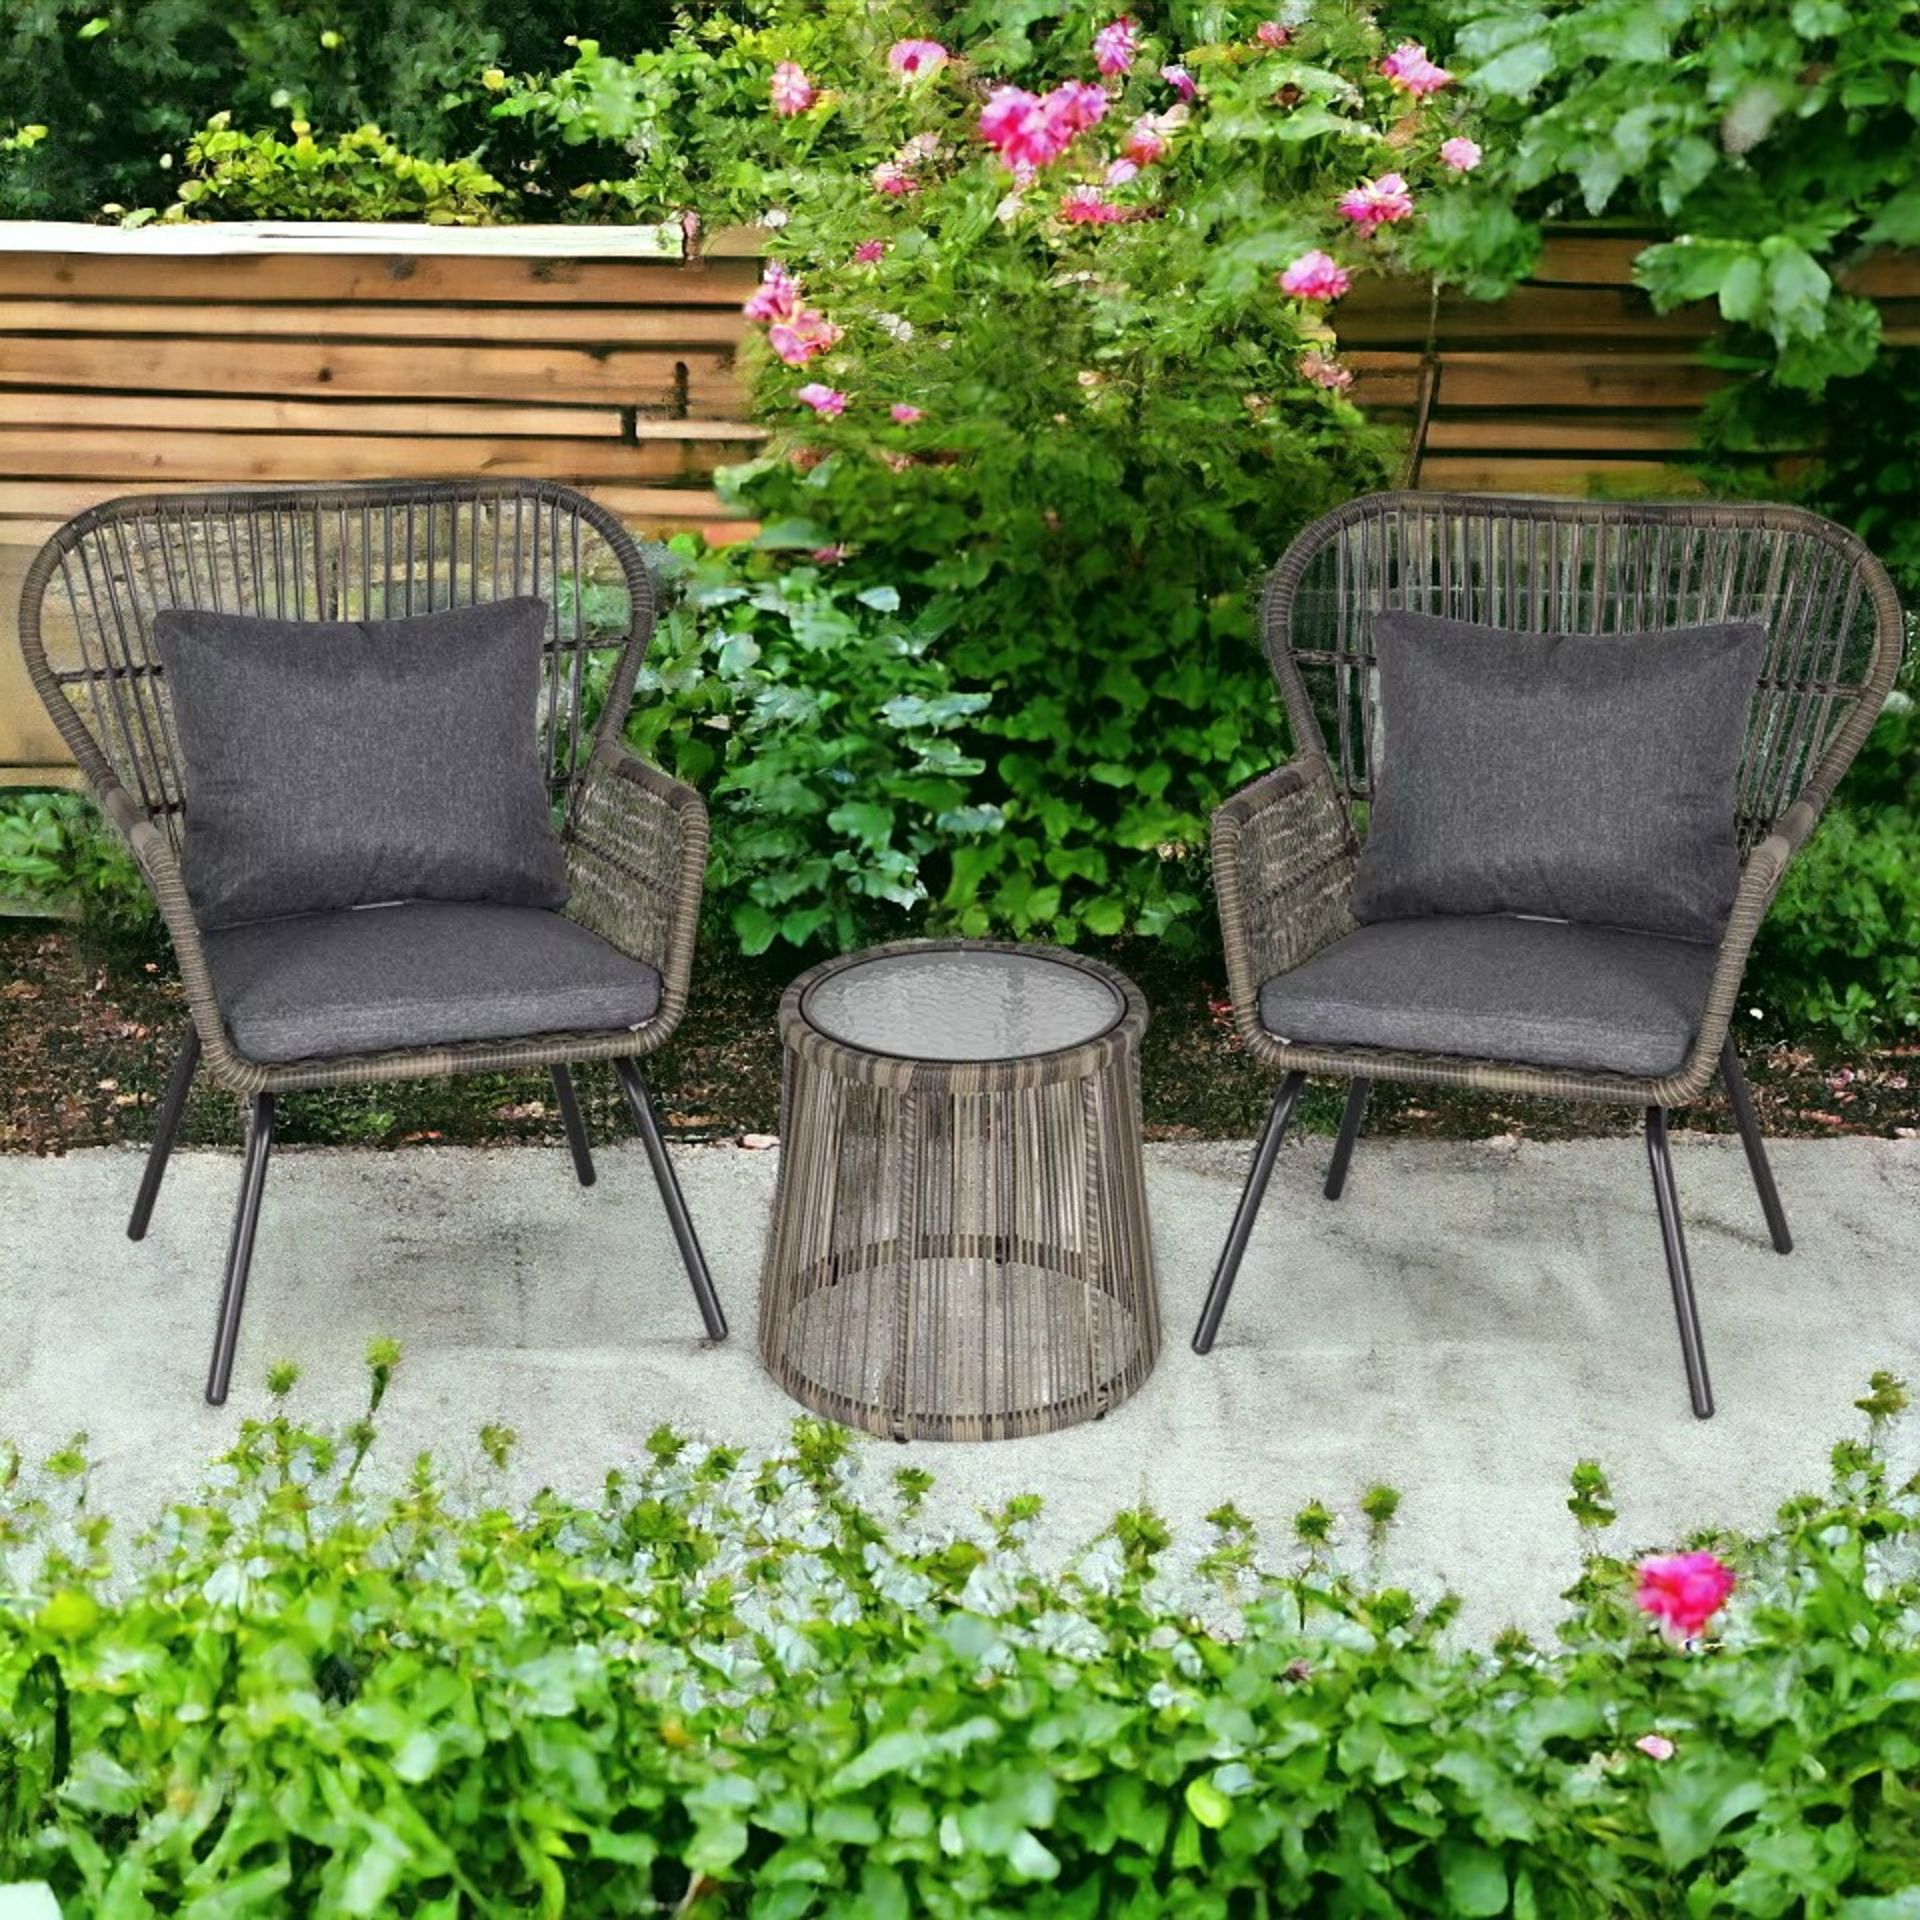 FREE DELIVERY - BRAND NEW 3 PCS WEBBED PE RATTAN OUTDOOR PATIO SET W/ CUSHIONS STEEL FRAME GREY